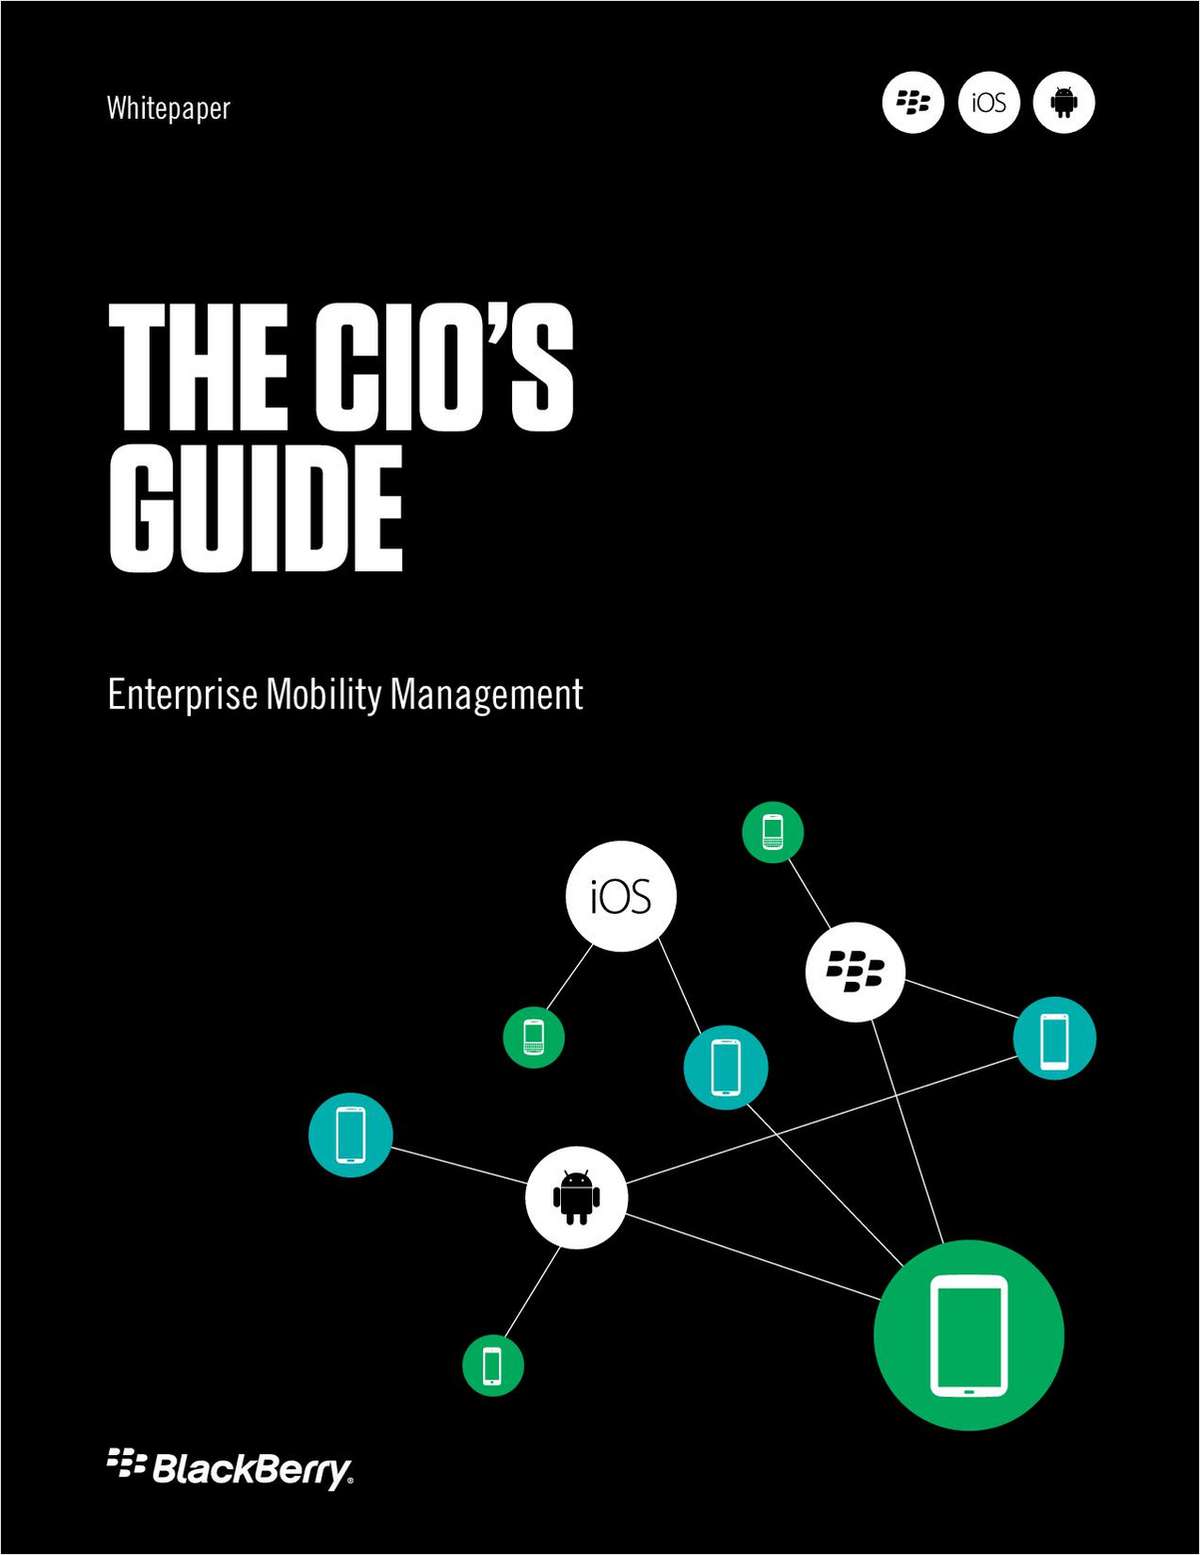 The CIO's Guide to Enterprise Mobility Management (EMM)